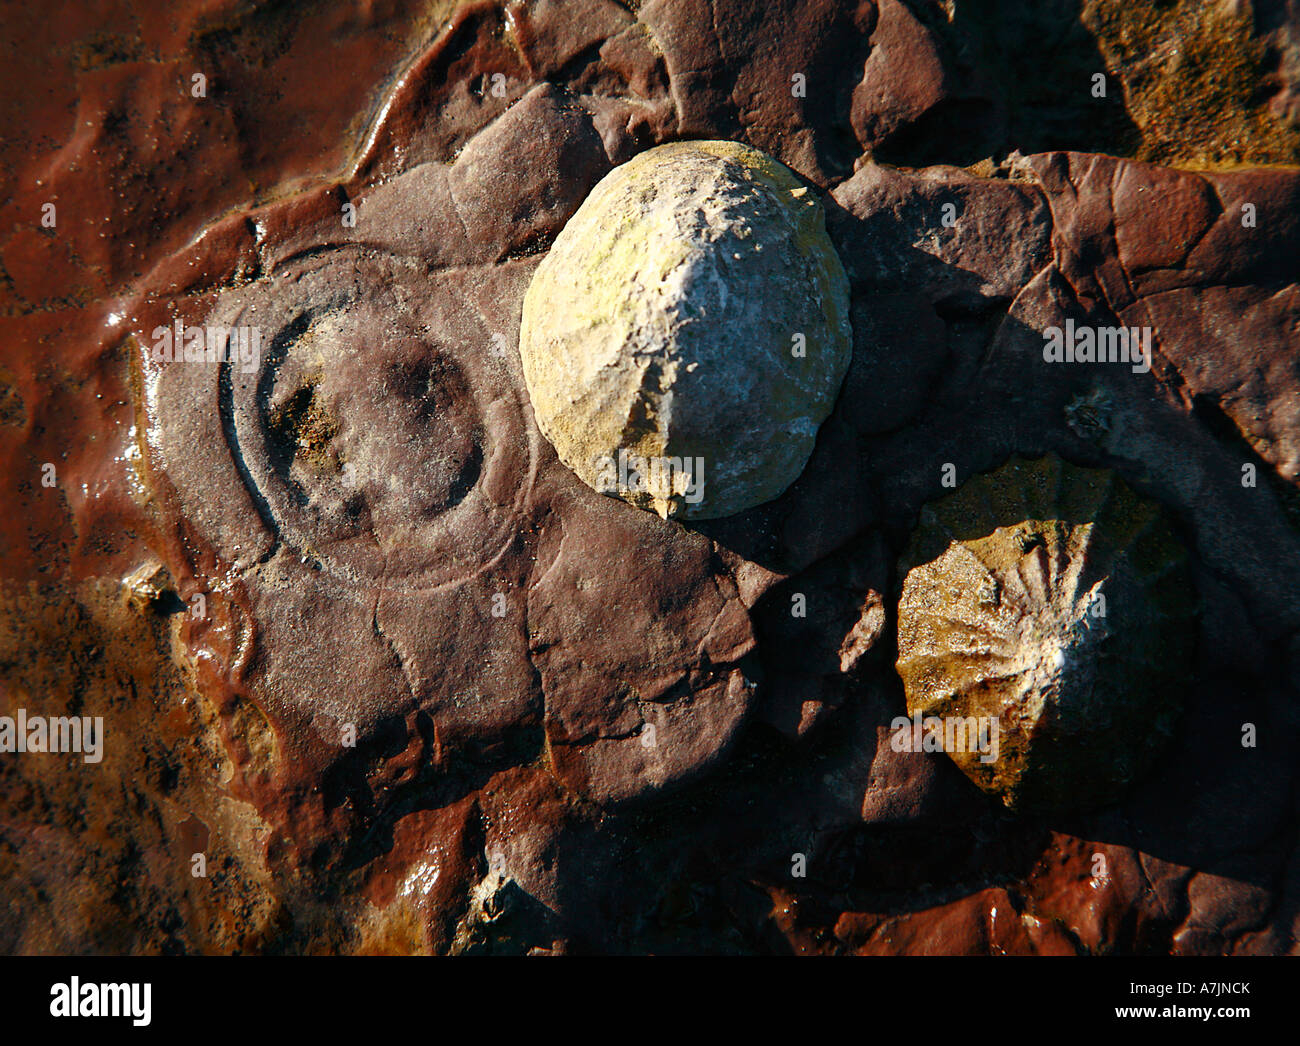 Common limpets Patella vulgata and rings worn in hard rock where a limpet has been Stock Photo